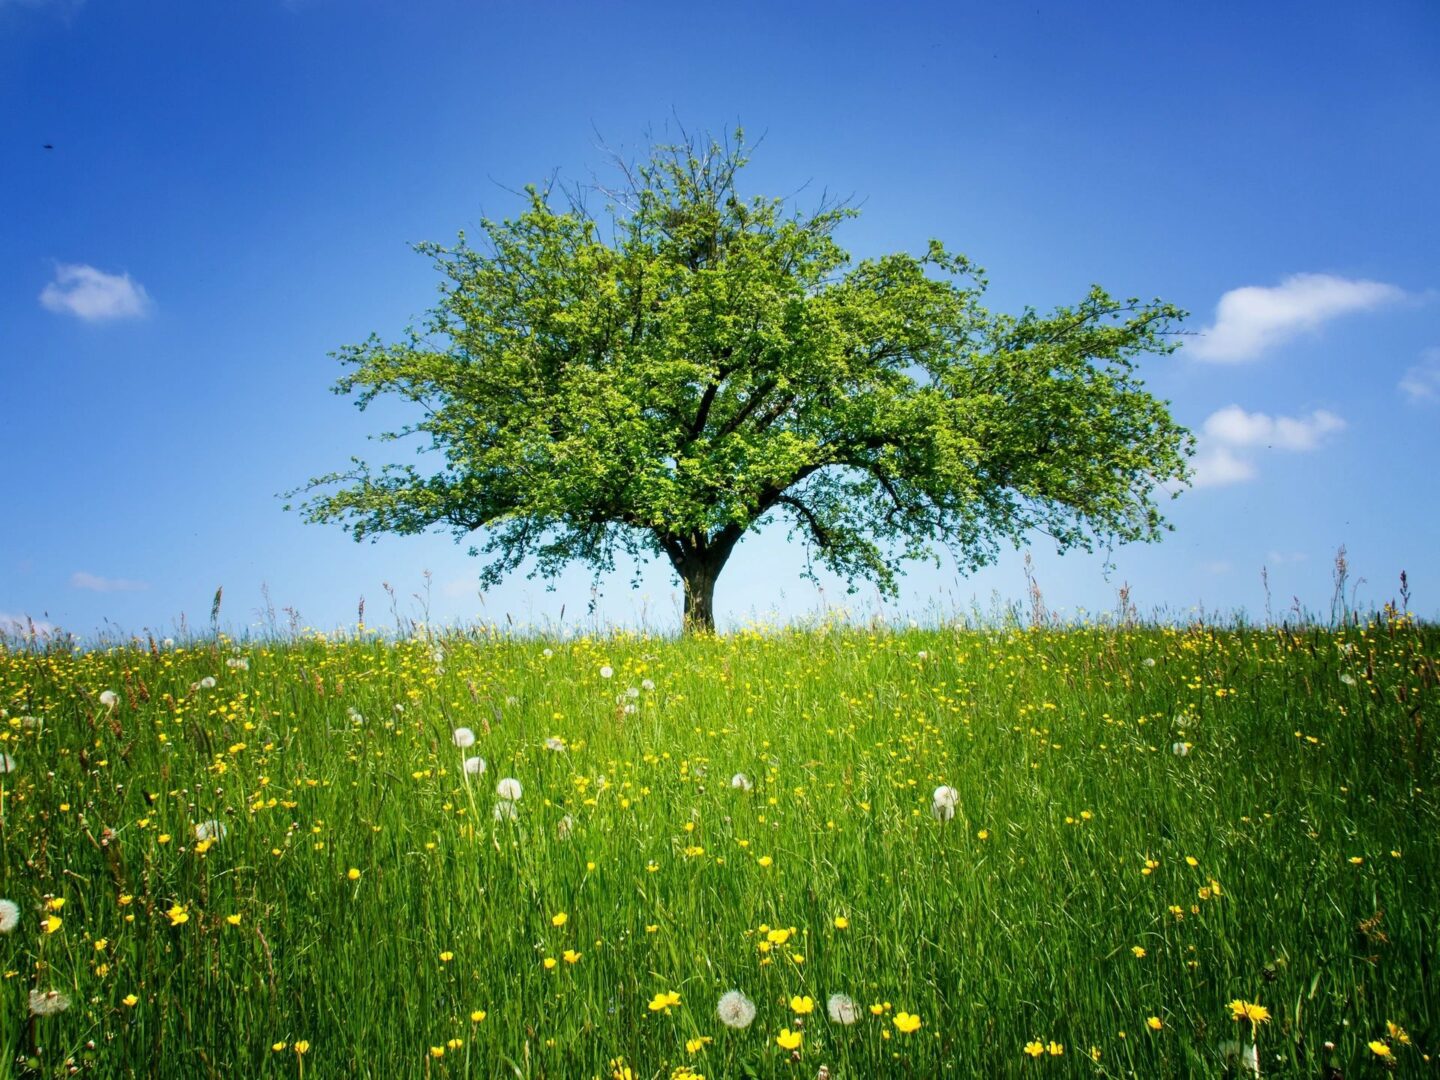 A tree in the middle of a field with flowers.